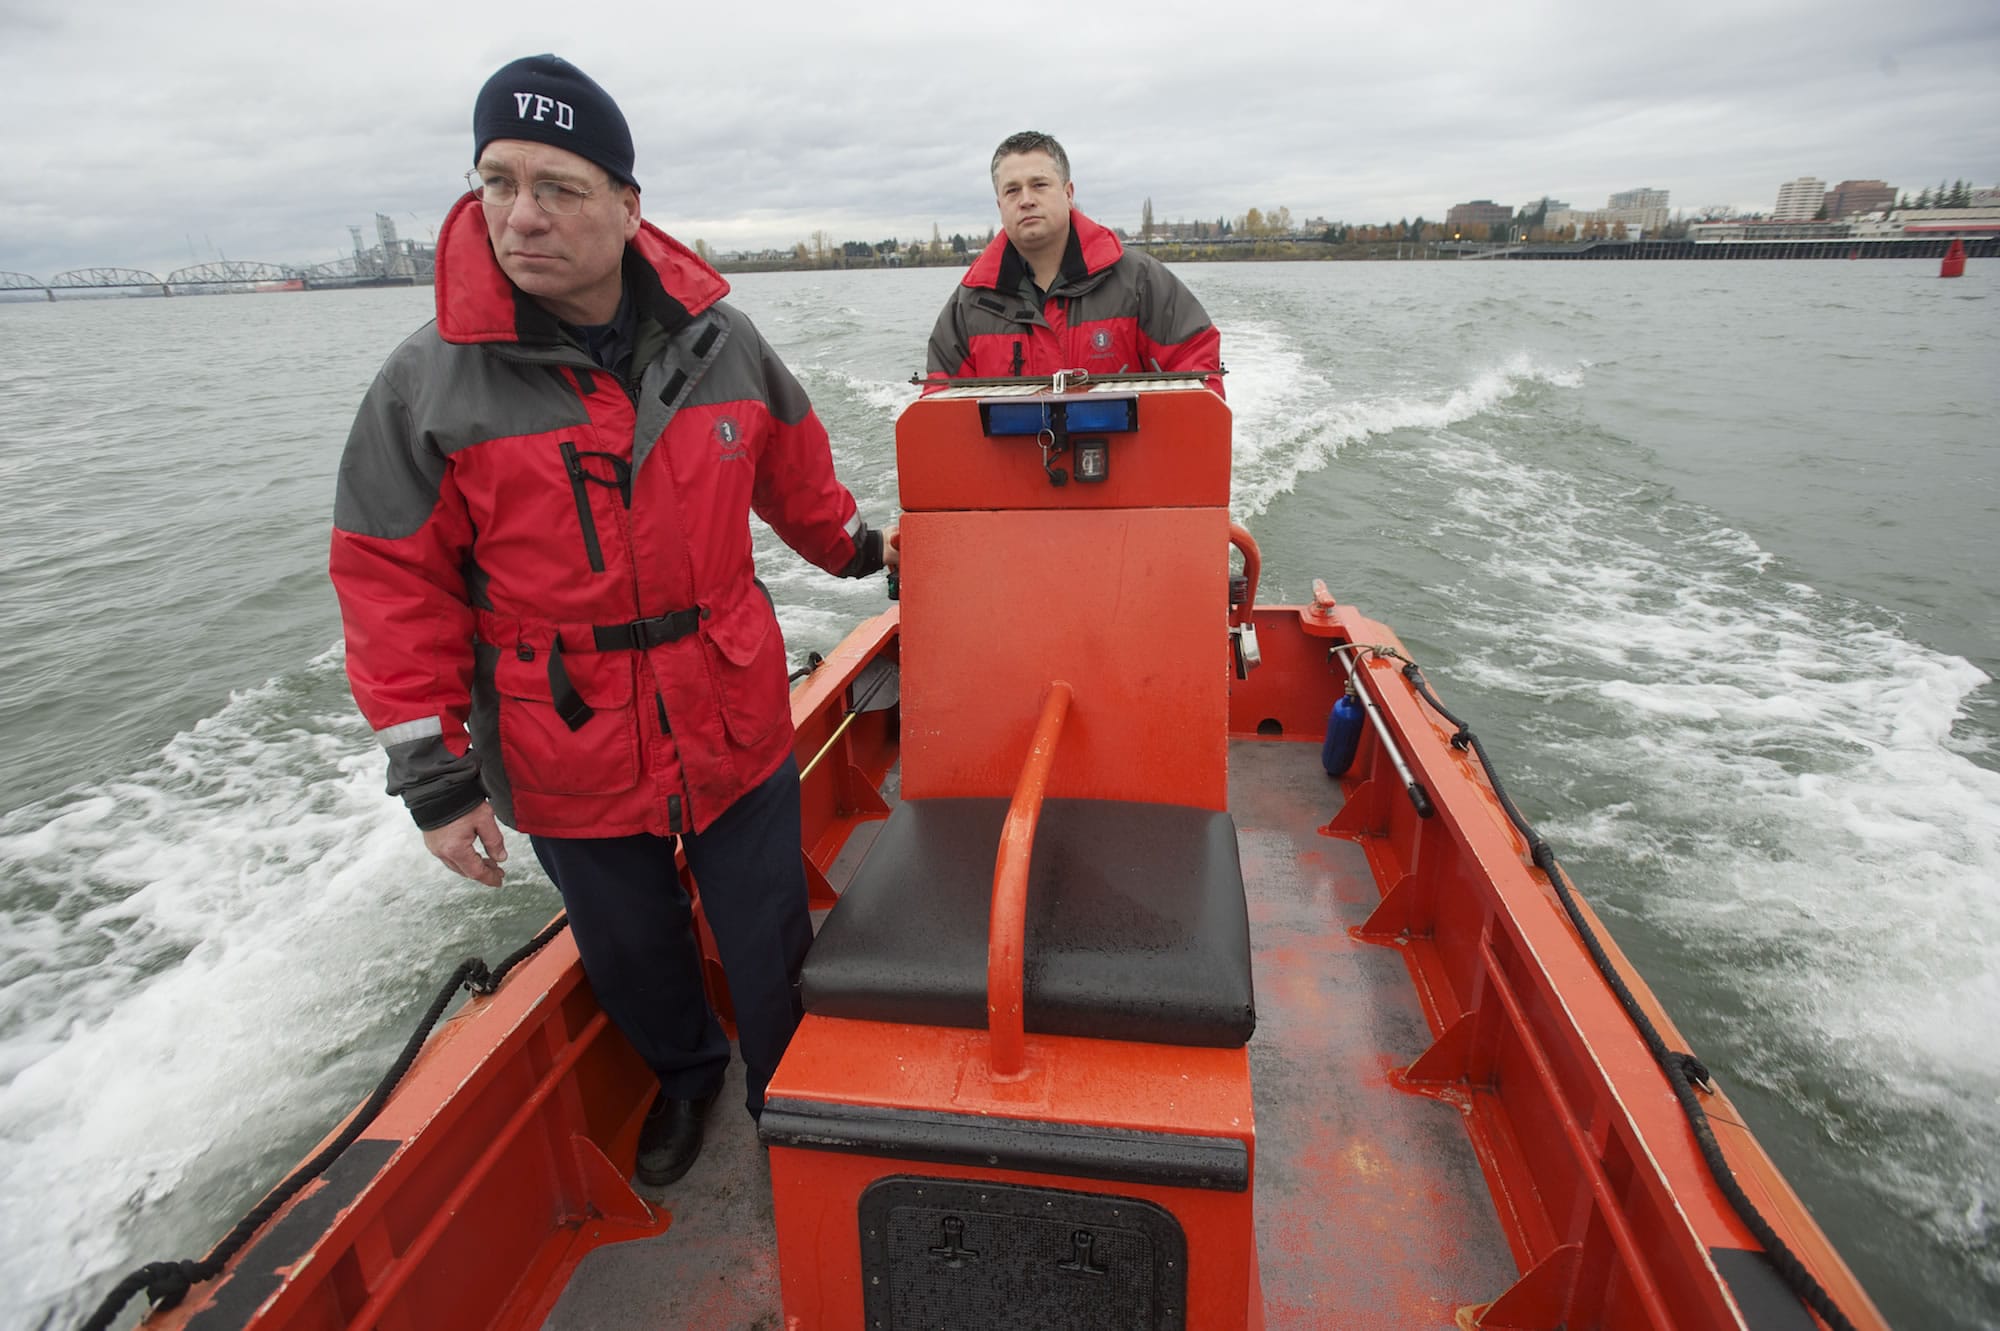 Vancouver Fire Department Captain Tom Coval, left, and firefighter Casey Holmes demonstrate the top speed of the department's boat on the Columbia River on Nov. 29. The boat maxes out at 20 miles per hour.